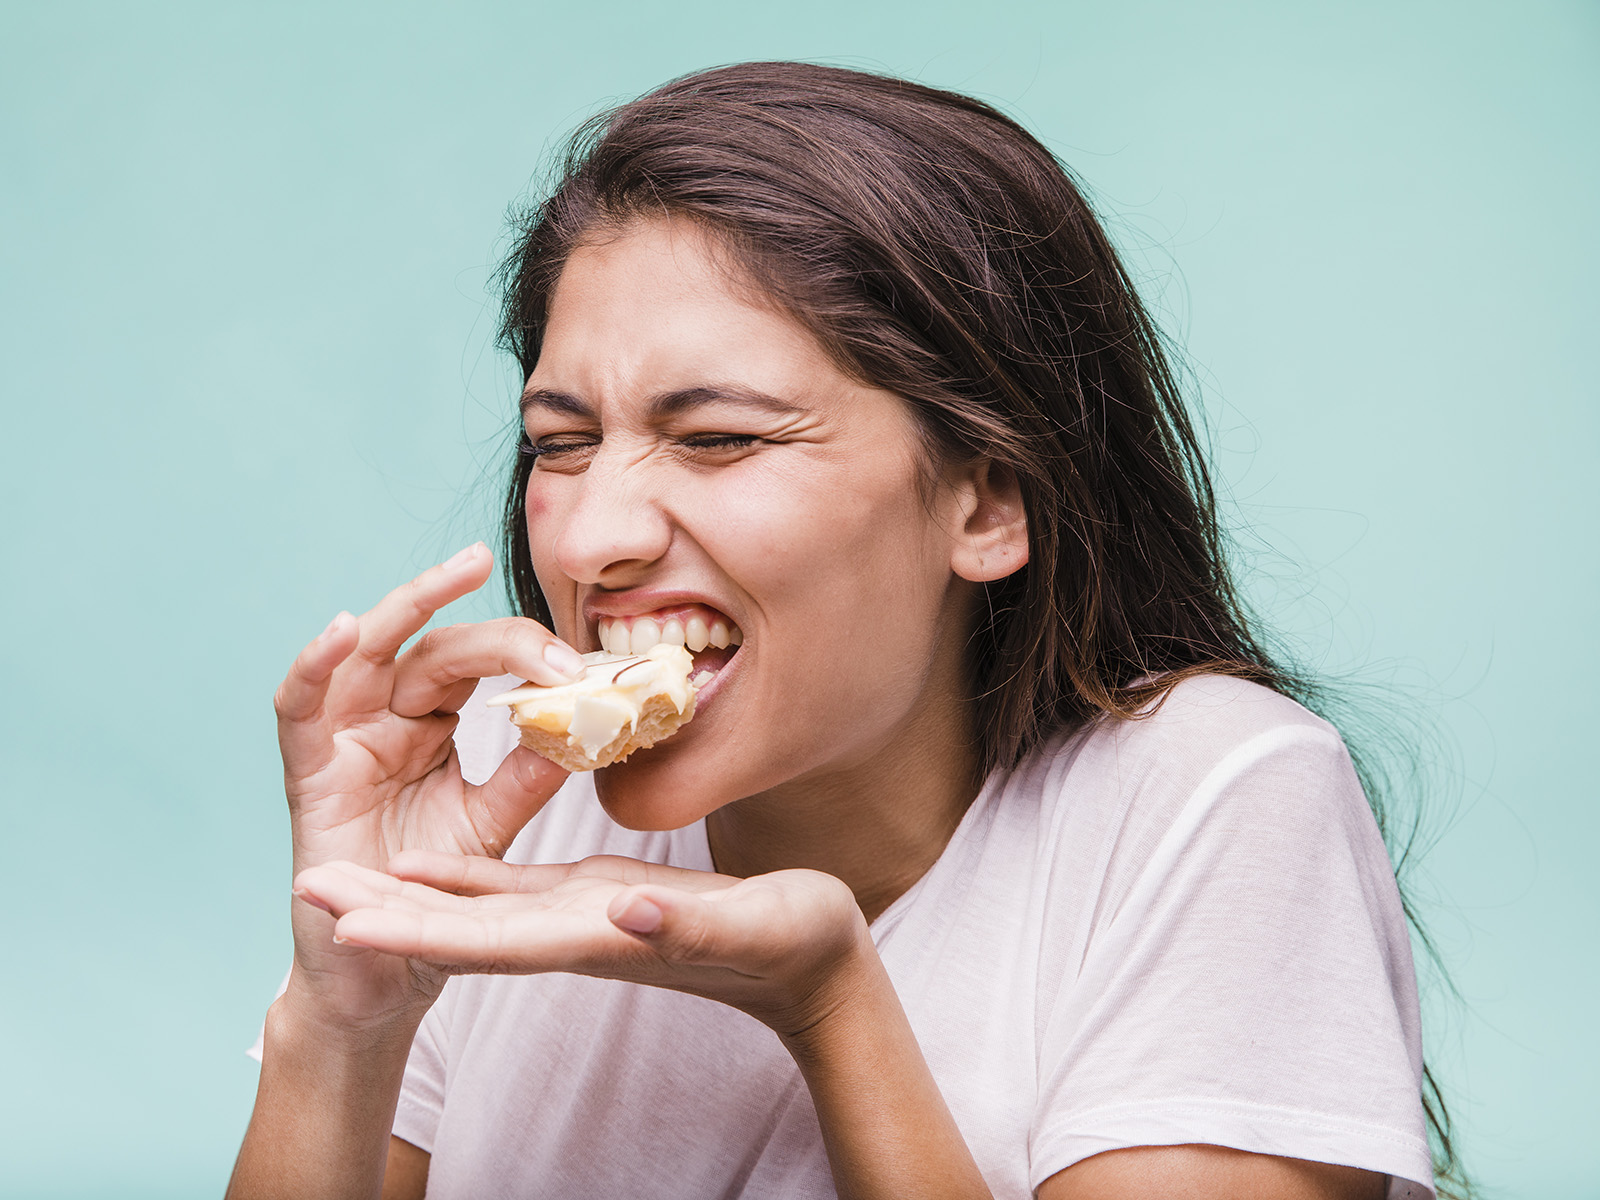 How To Reduce The Impact That Sugar Has On Teeth